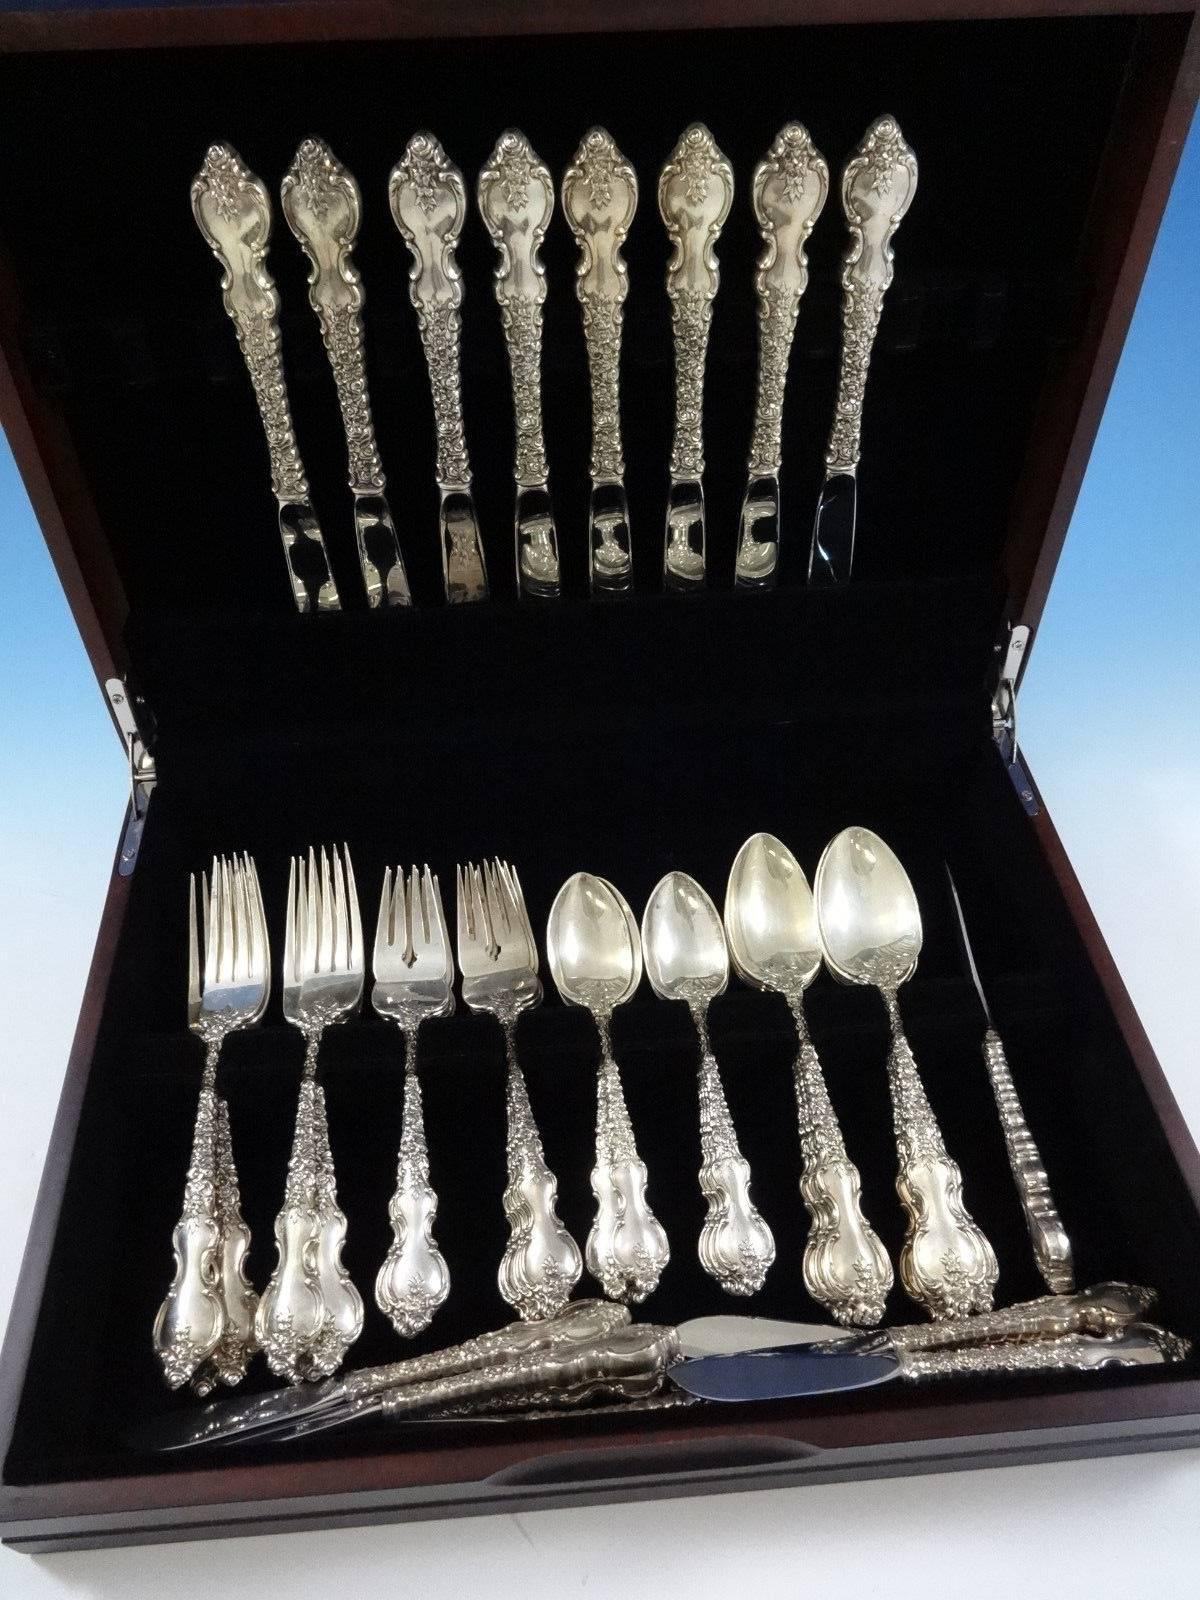 Gorgeous Du Barry by International sterling silver flatware set of 48 pieces. This set includes:

Eight knives, 9